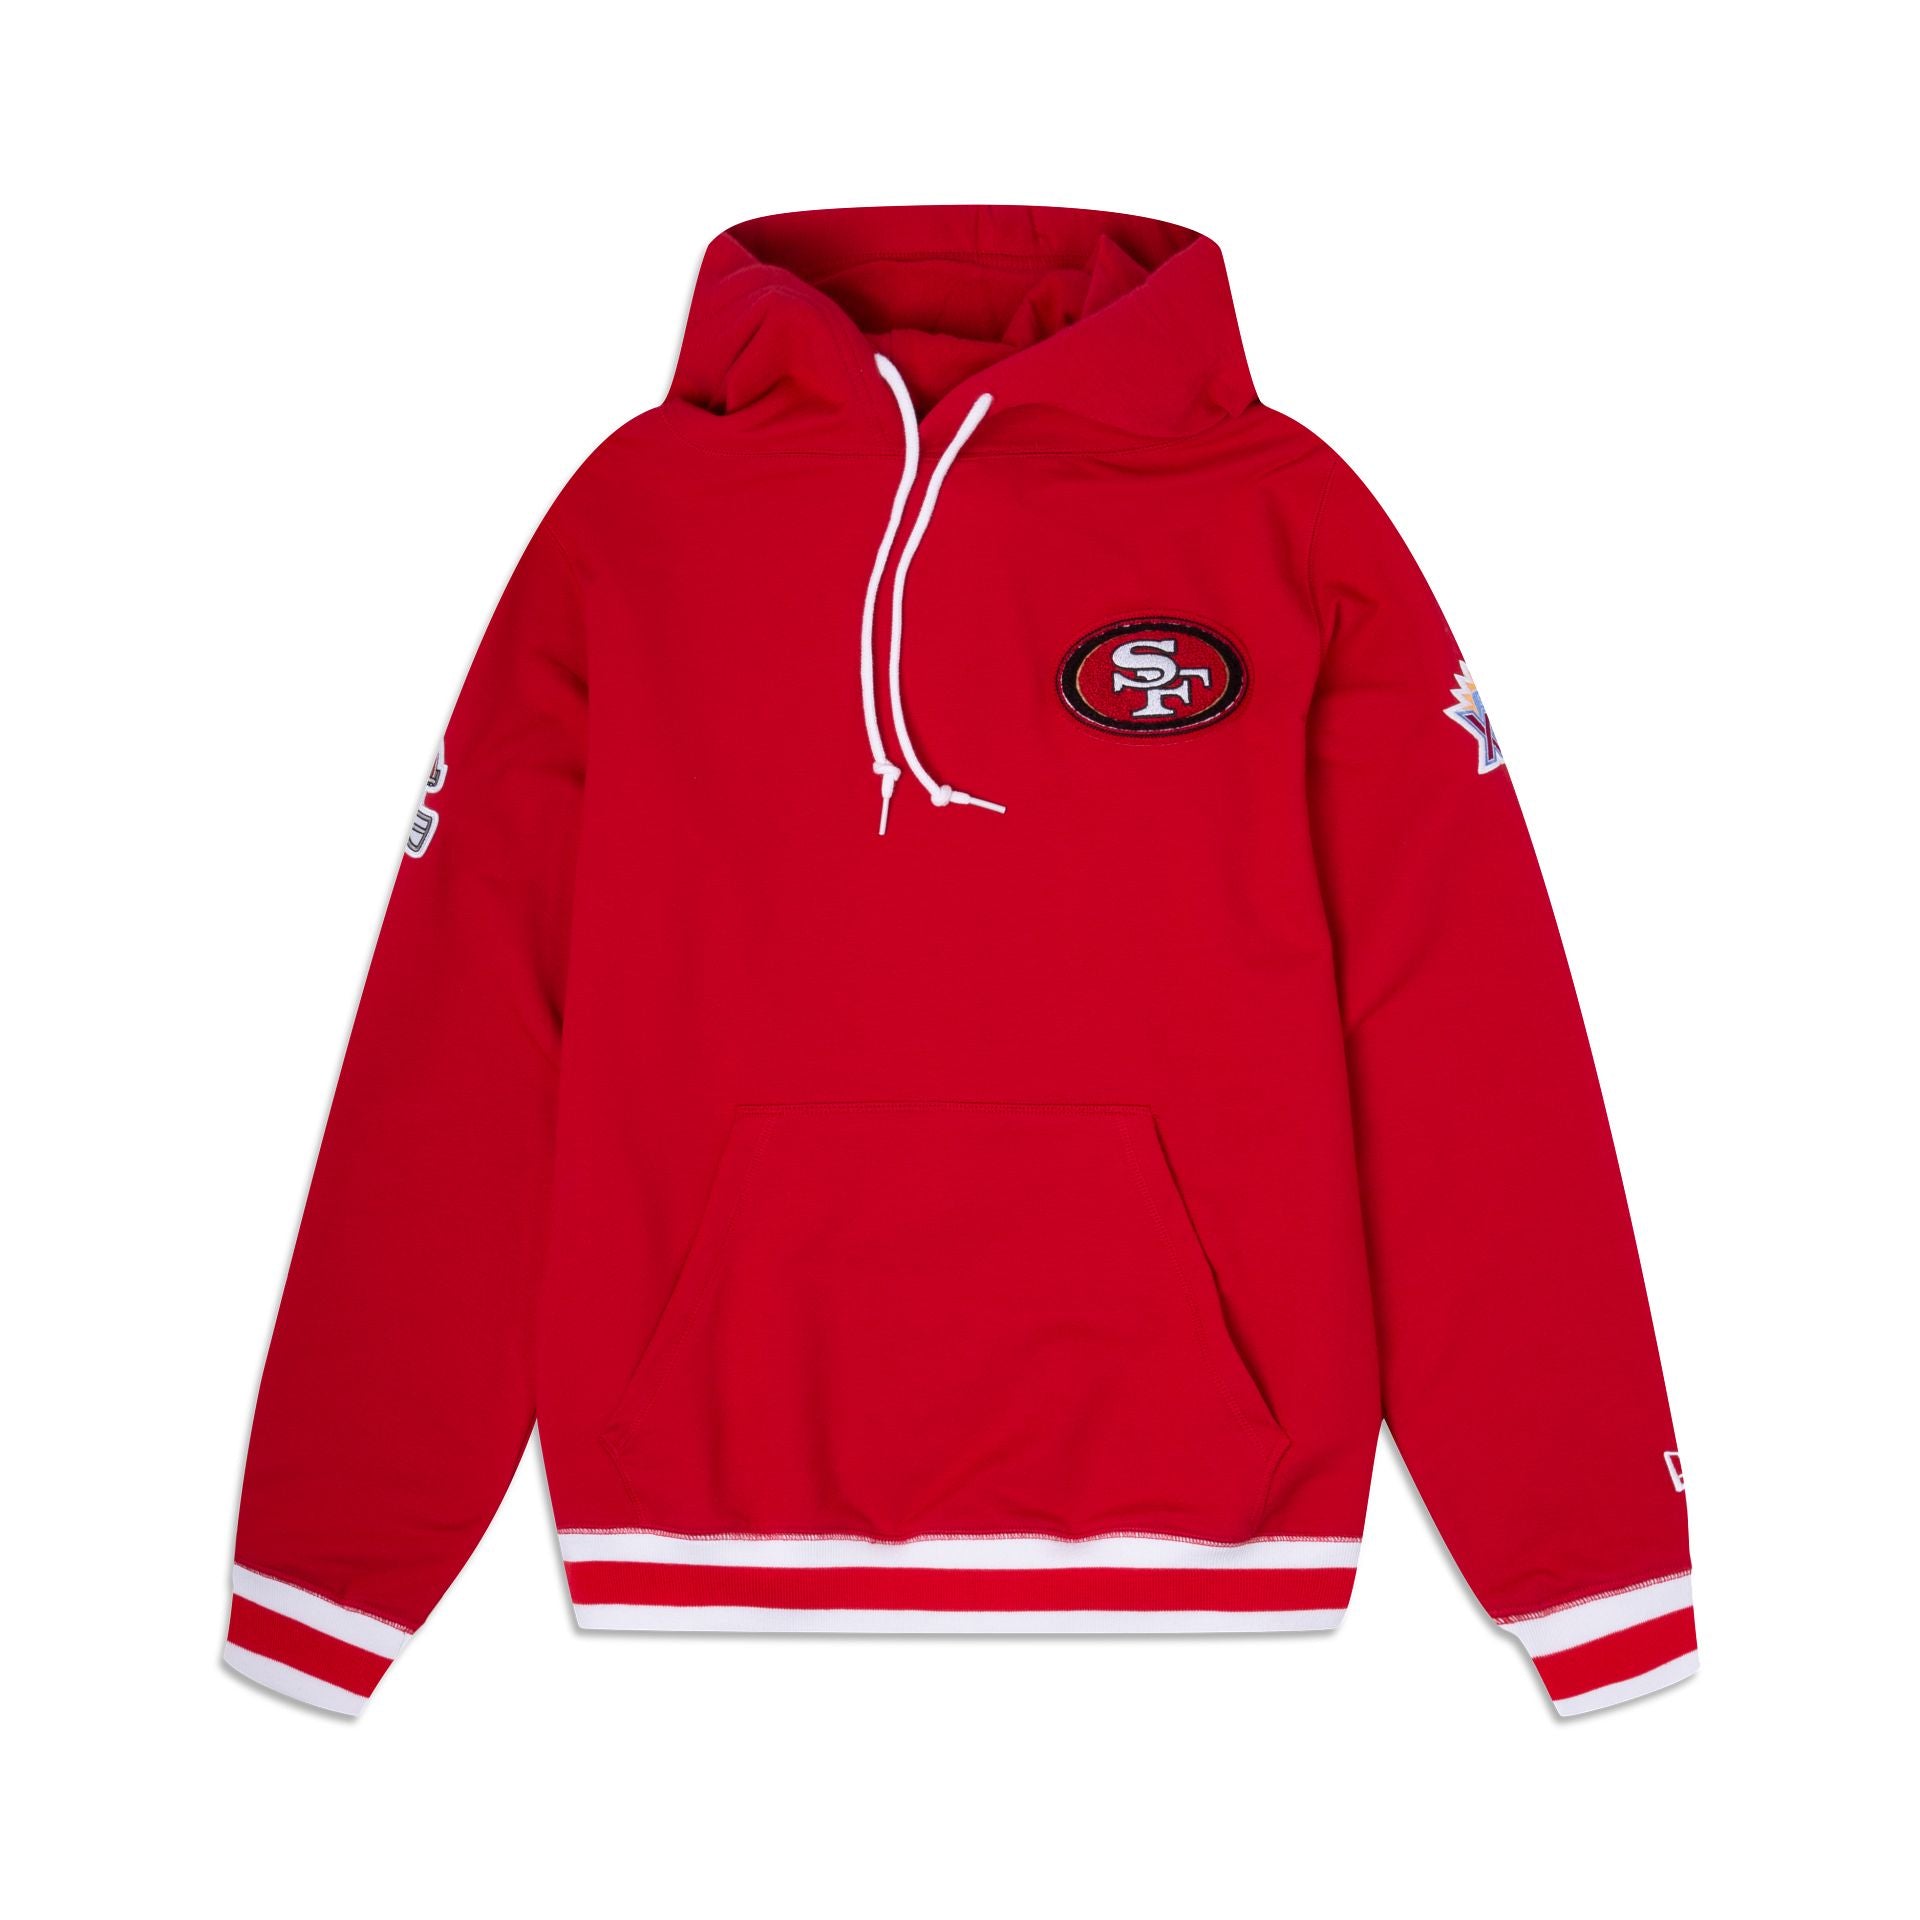 St. Louis City SC Red Women's Hoodie FREE SHIPPING 